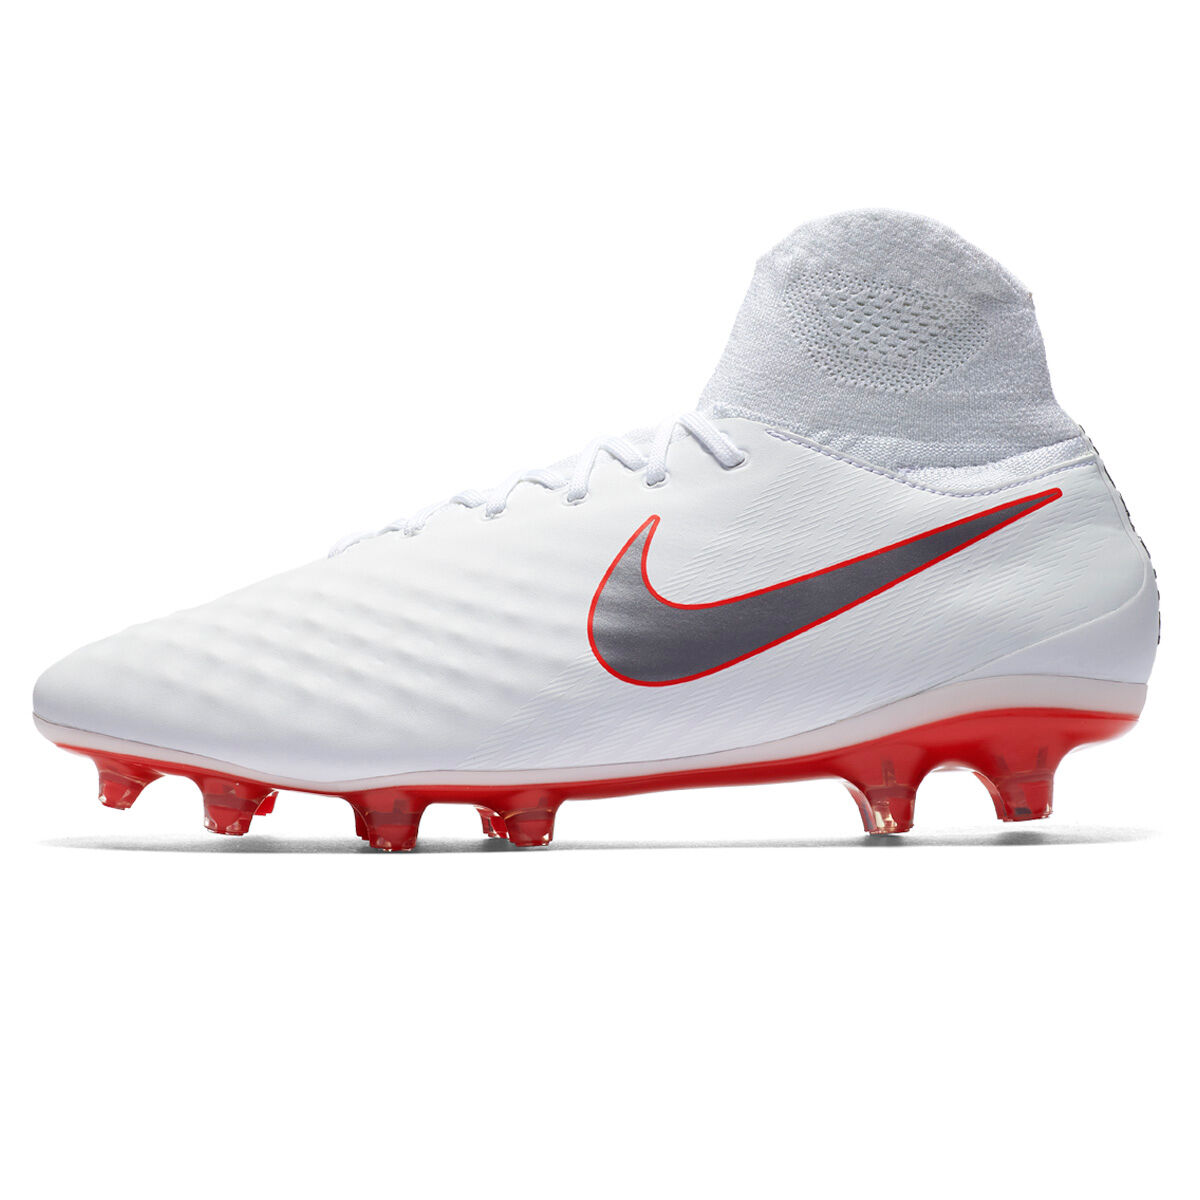 entonces Mago polvo Magista Obra 2 Sizing, Buy Now, Cheap Sale, 55% OFF, www.centreverd.cat